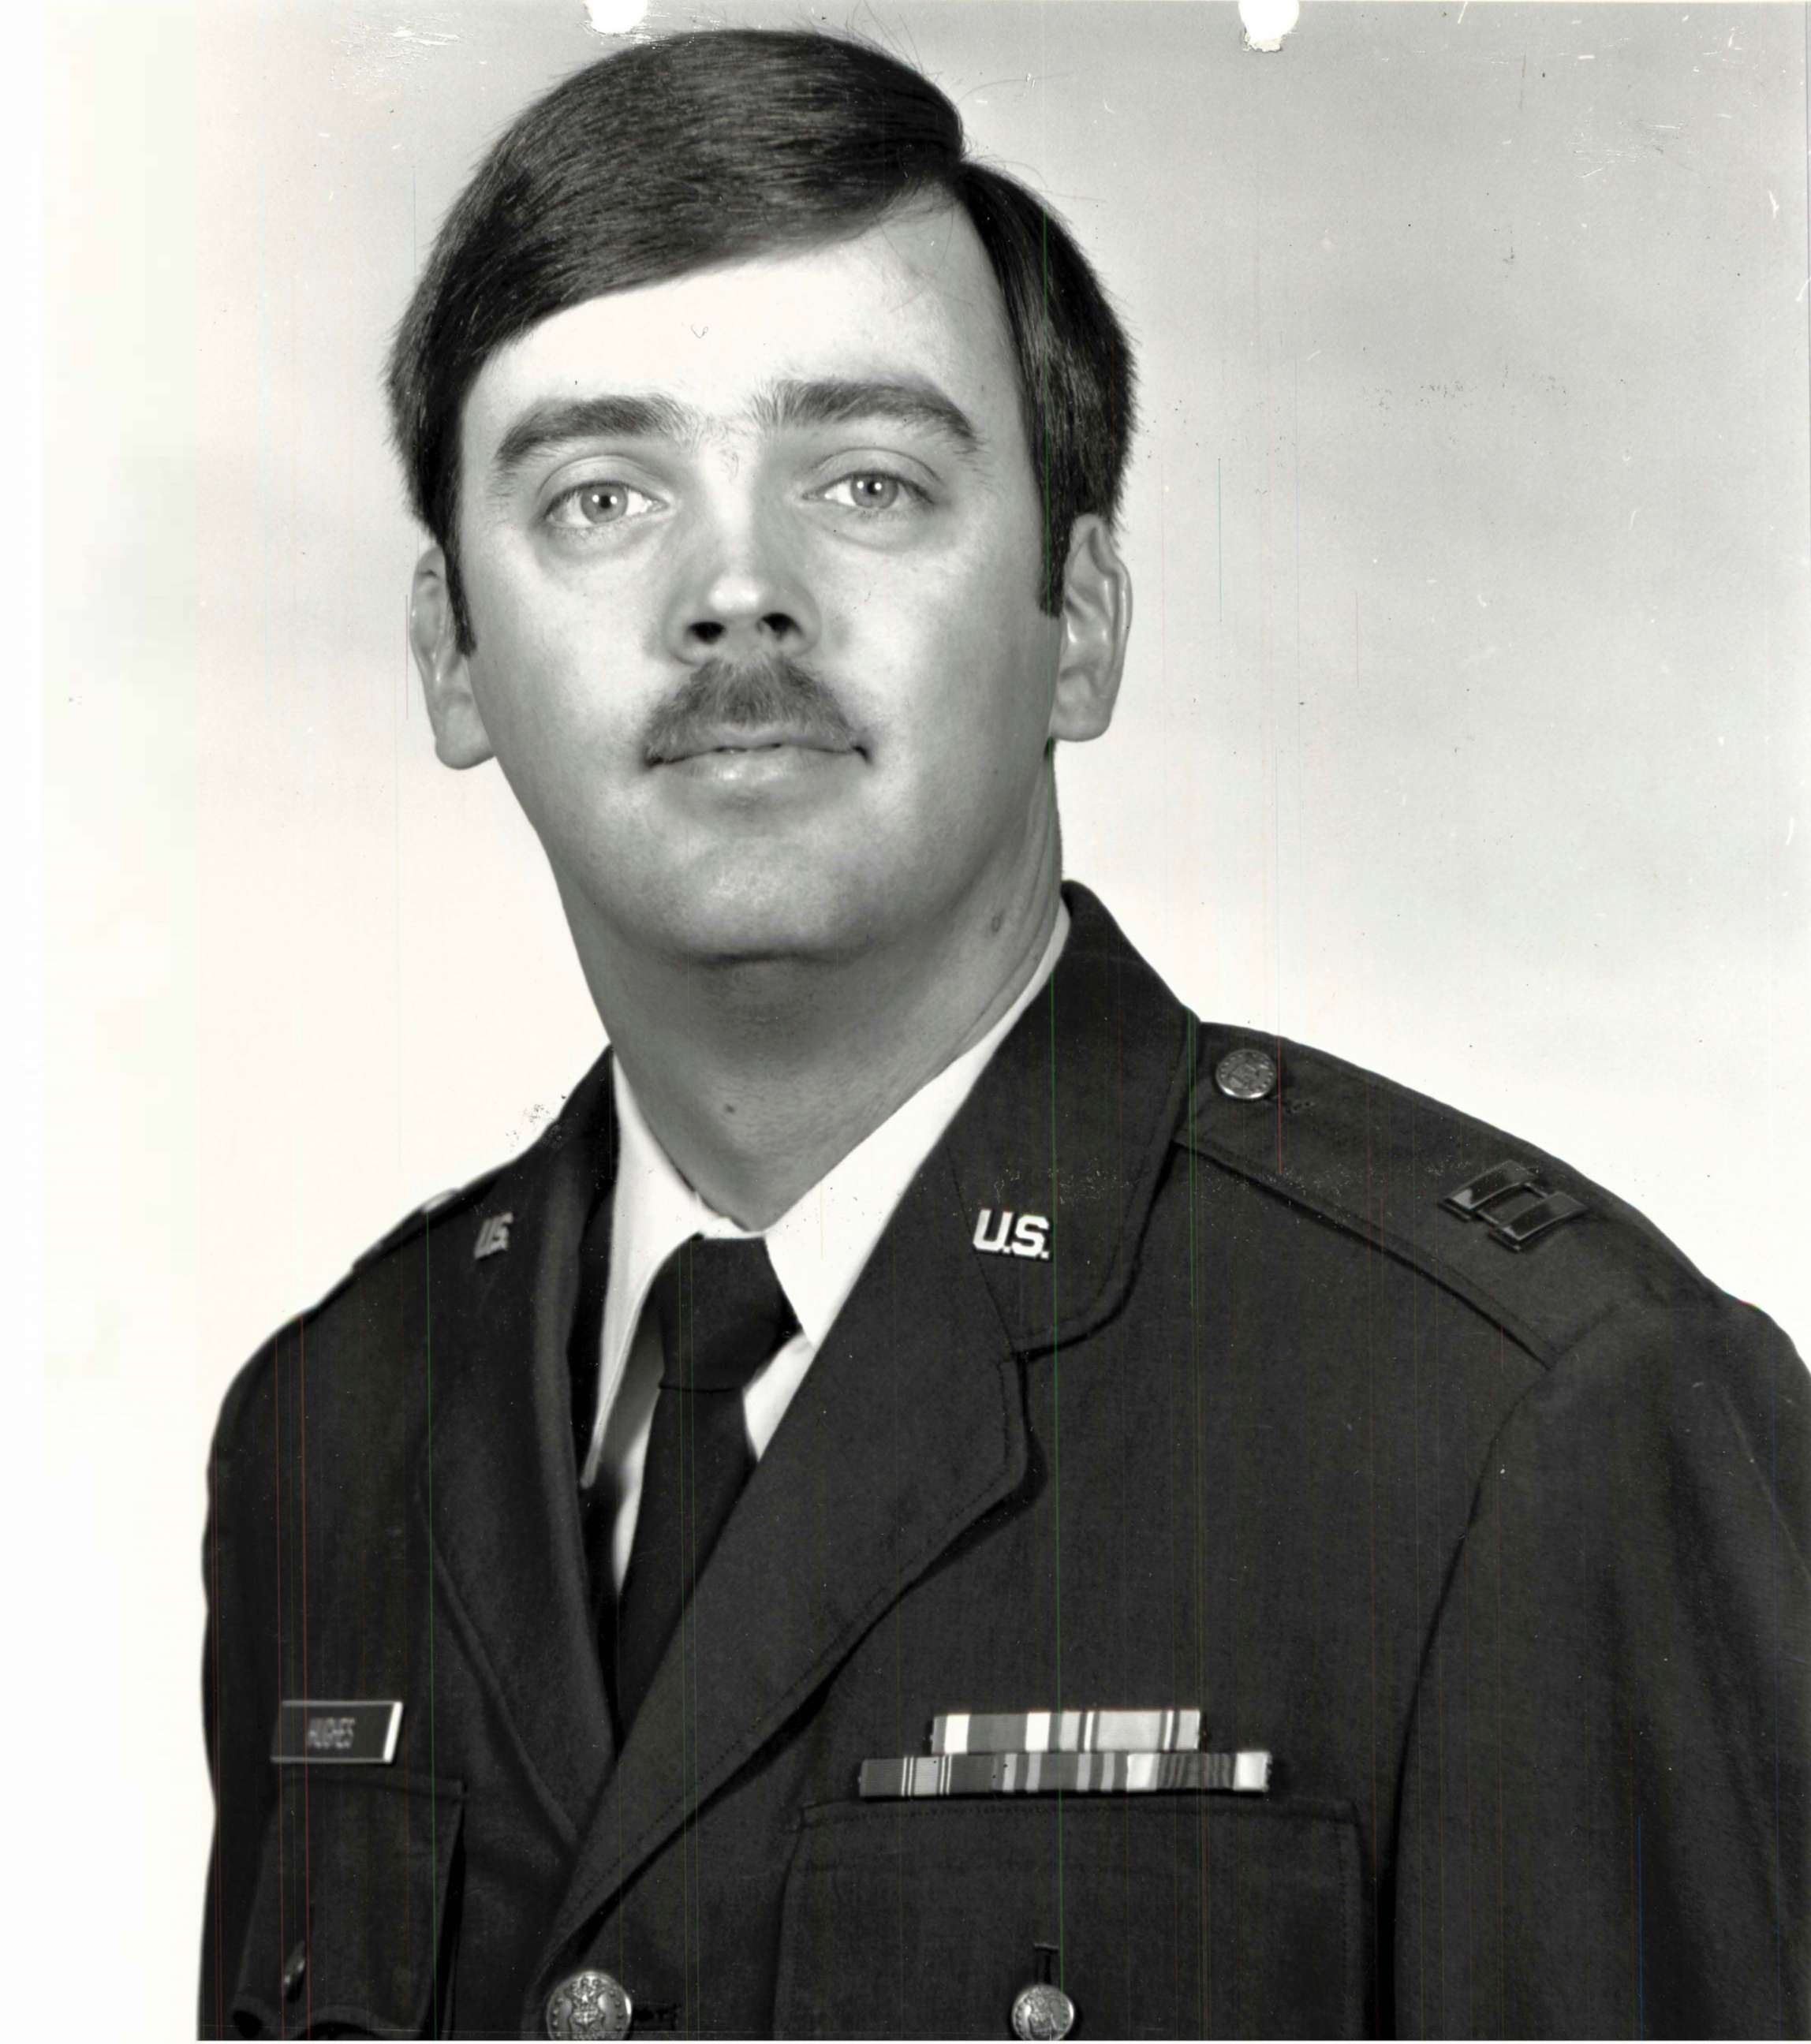 PHOTO: This undated photo released by the U.S. Air Force shows Capt. William Howard Hughes, Jr., who was formally declared a deserter by the Air Force Dec. 9, 1983.